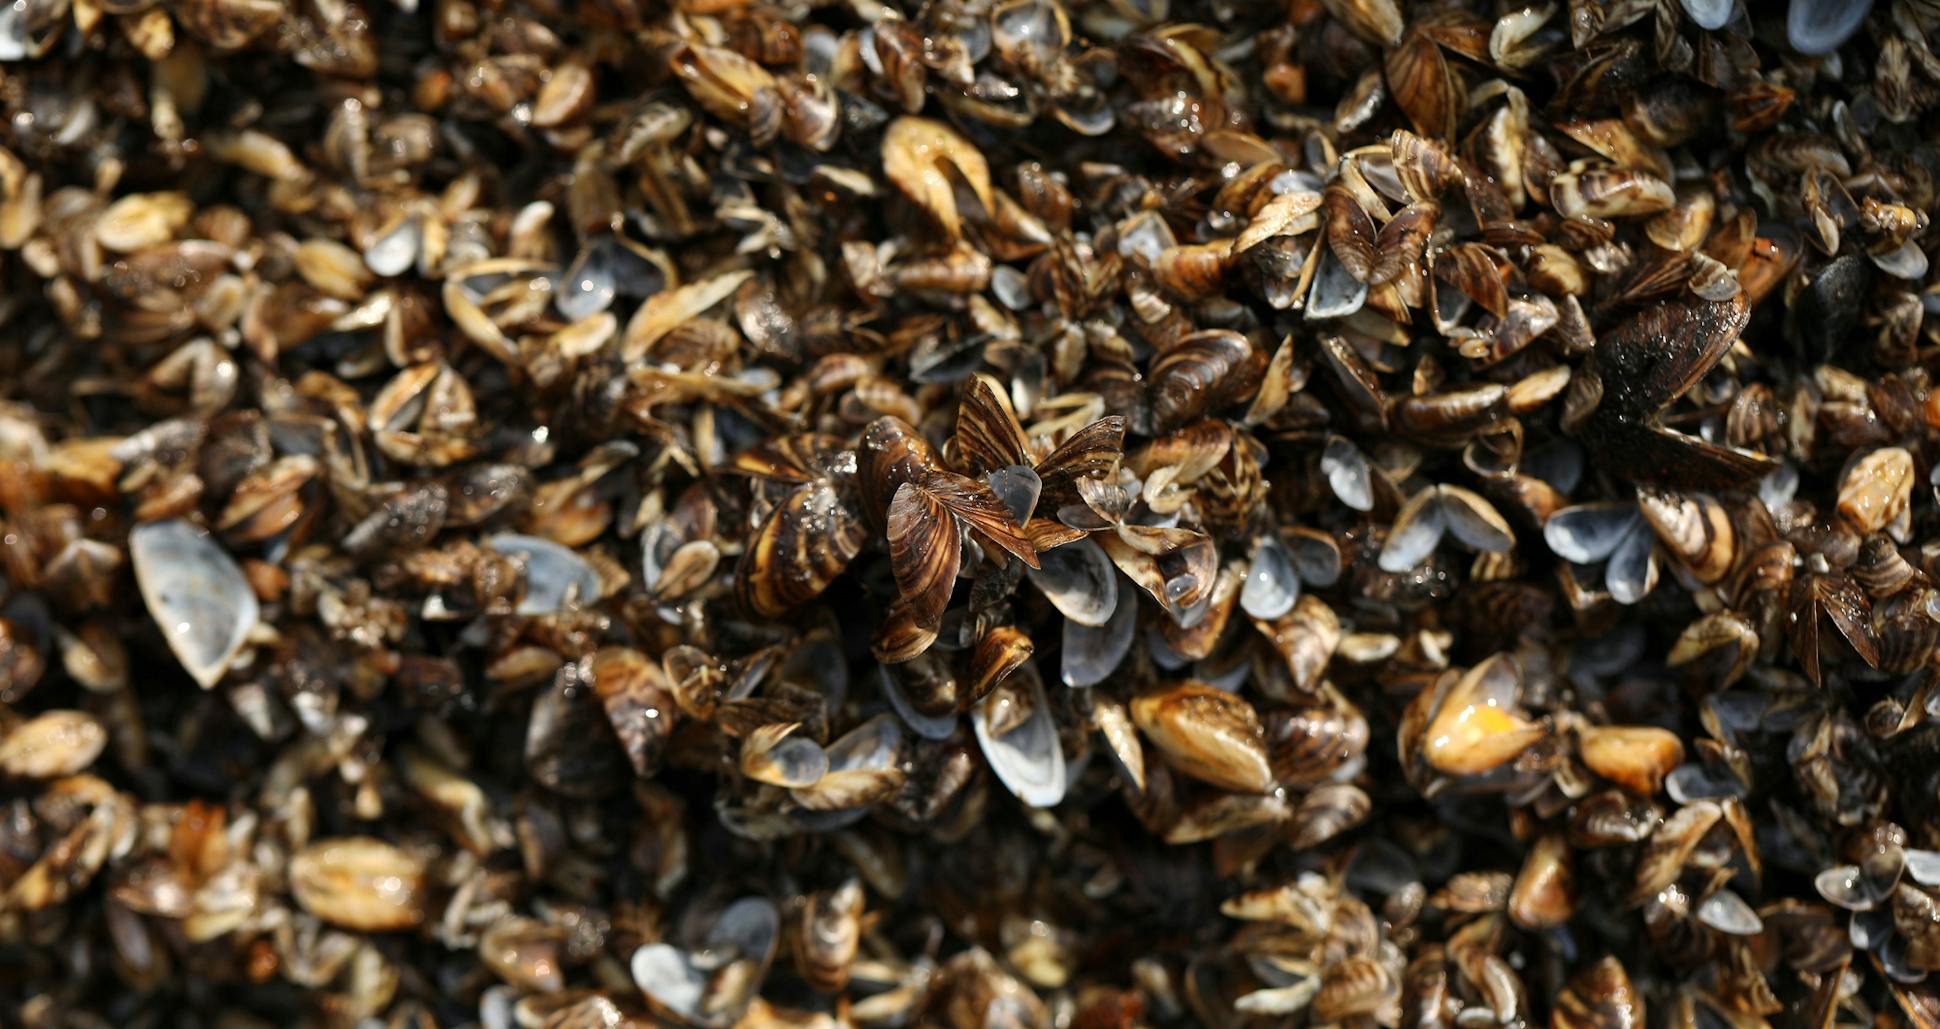 Zebra mussels disrupt a lake's ecosystem, collapsing the food chain. Above, a cluster of zebra mussels in White Bear Lake.